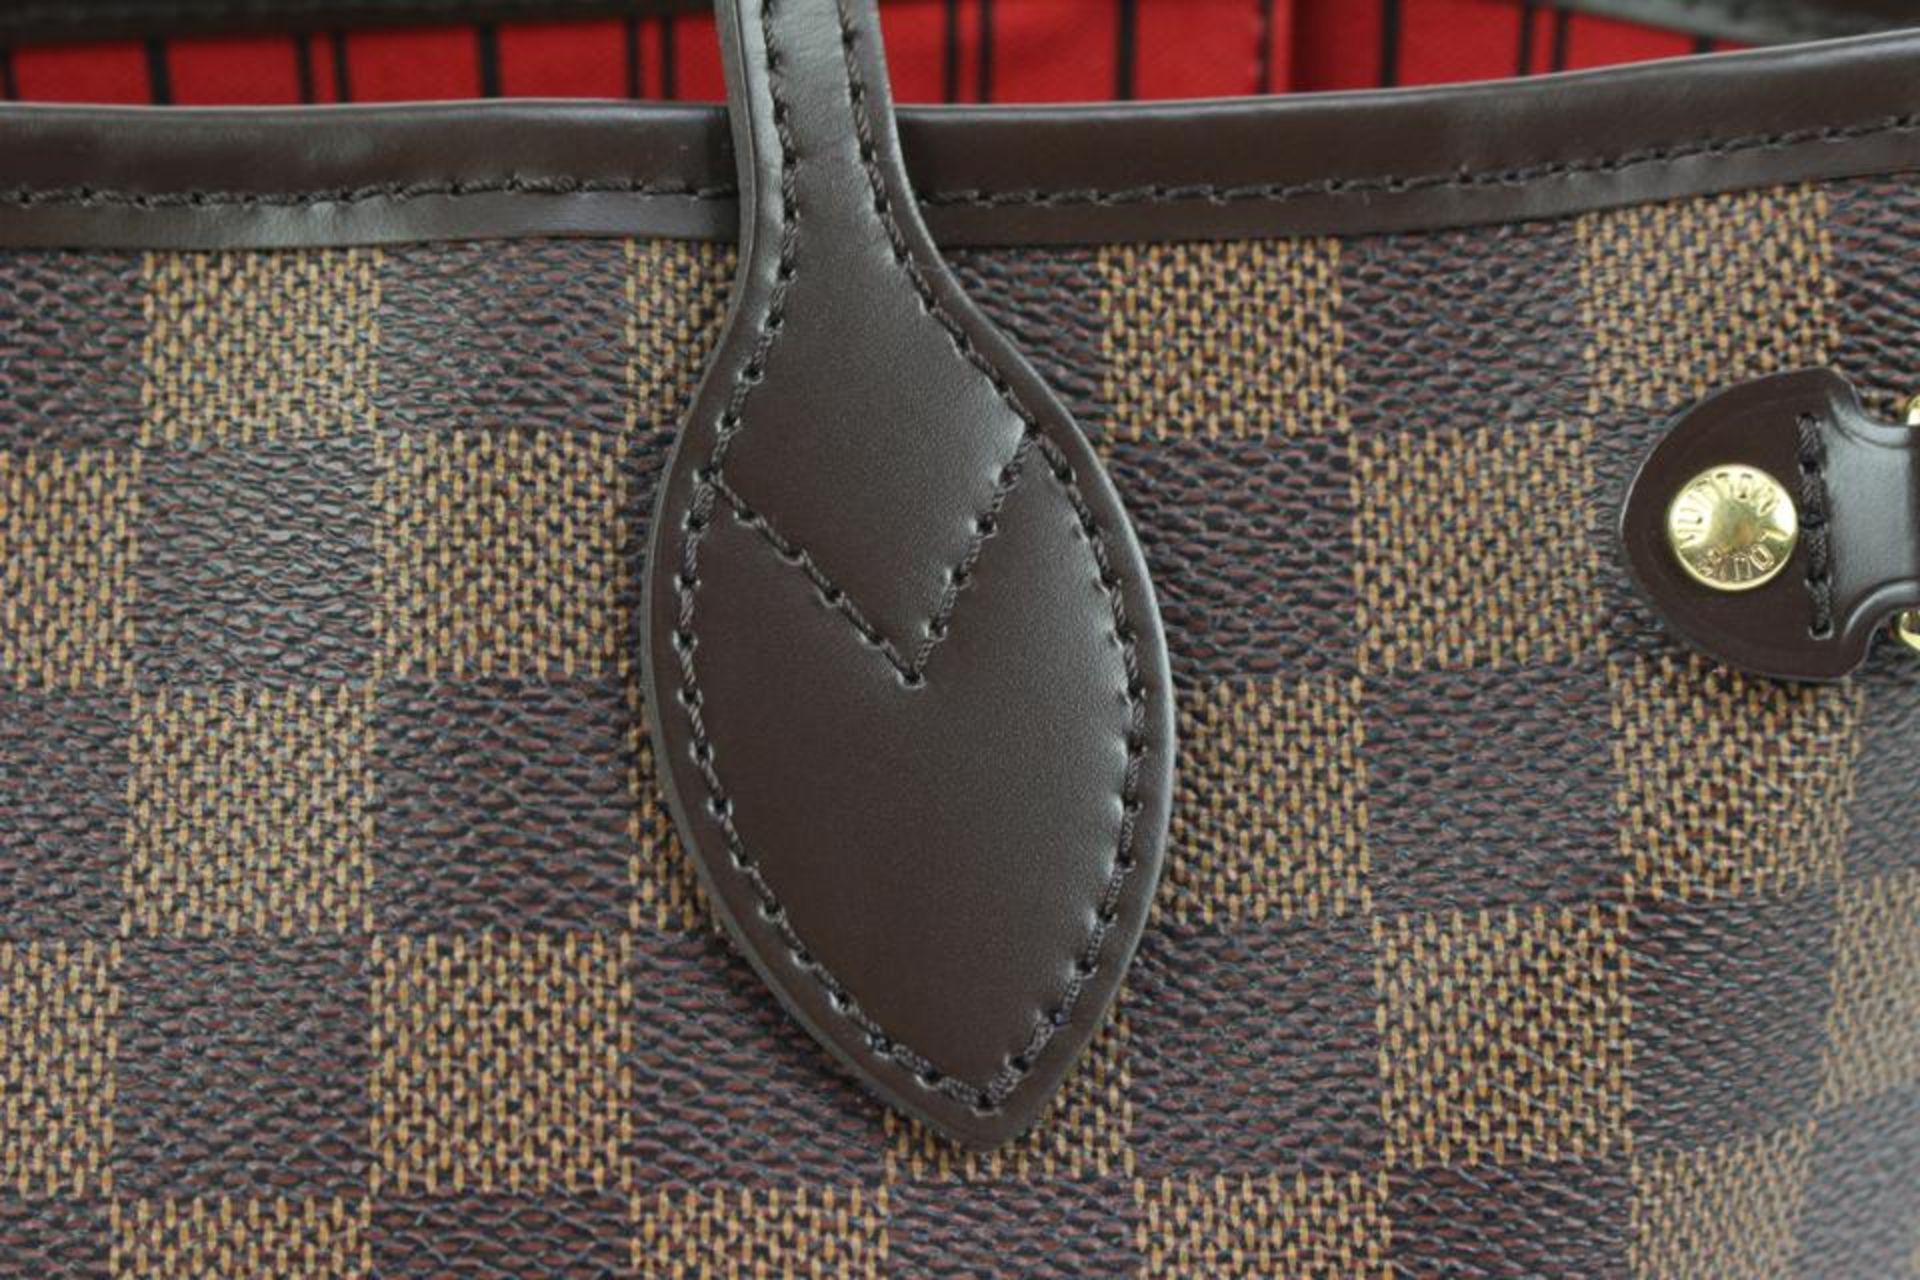 LOUIS VUITTON SMALL DAMIER EBENE NEVEFULL PM TOTE WITH POUCH - Image 3 of 12